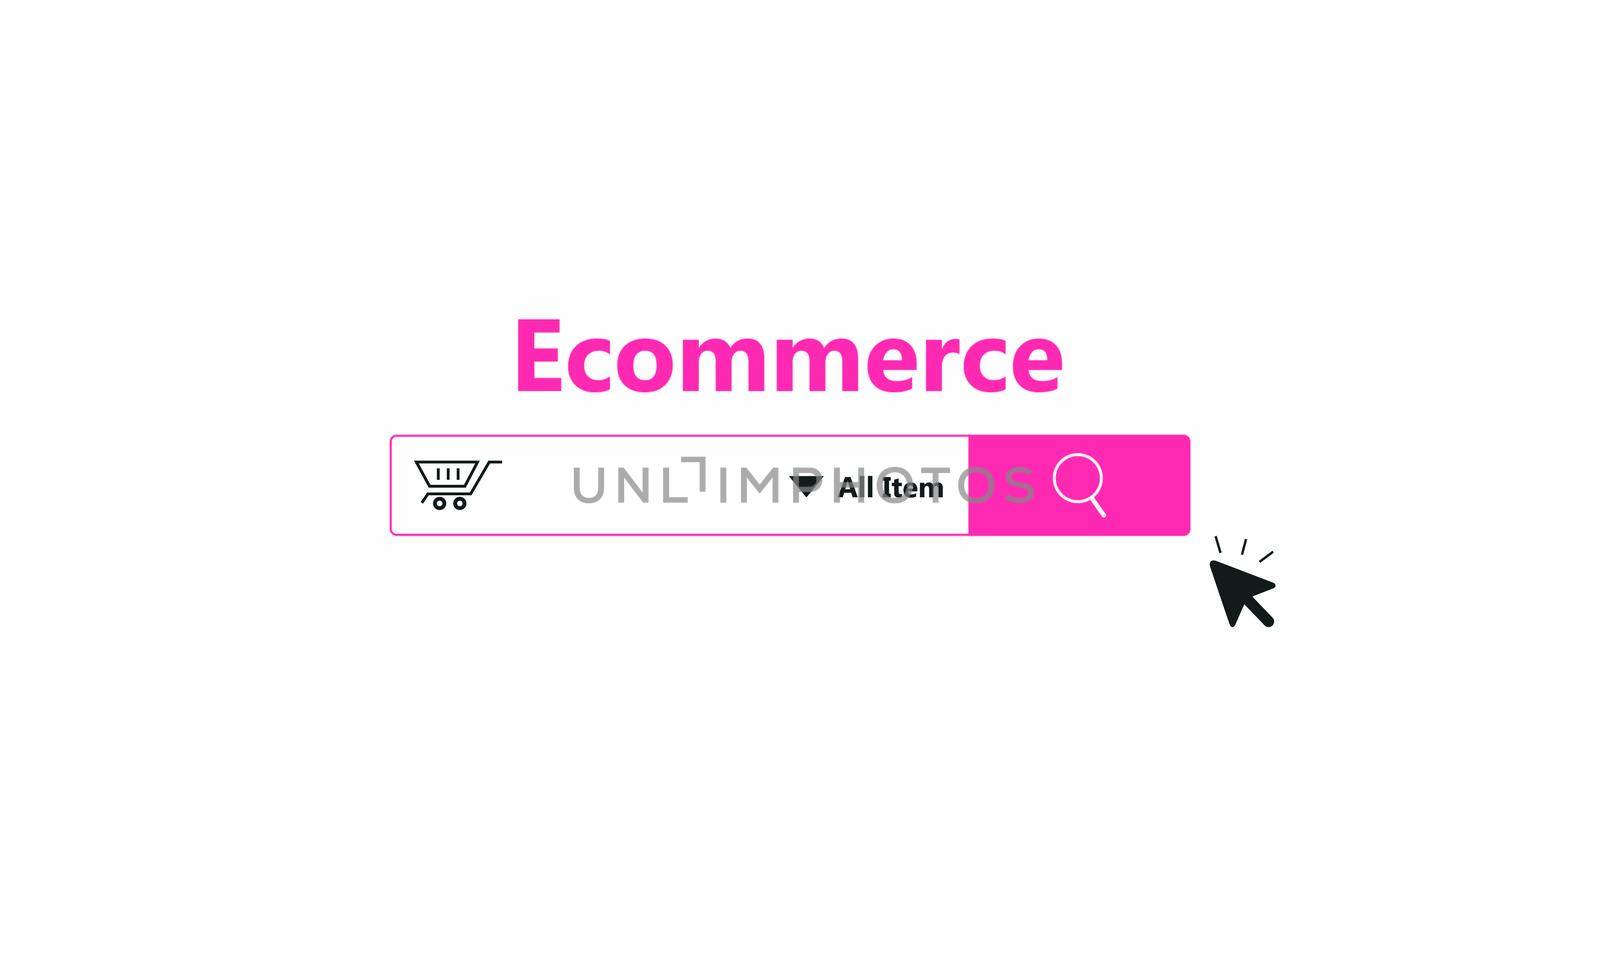 Ecommerce marketing services concept by ArtTist